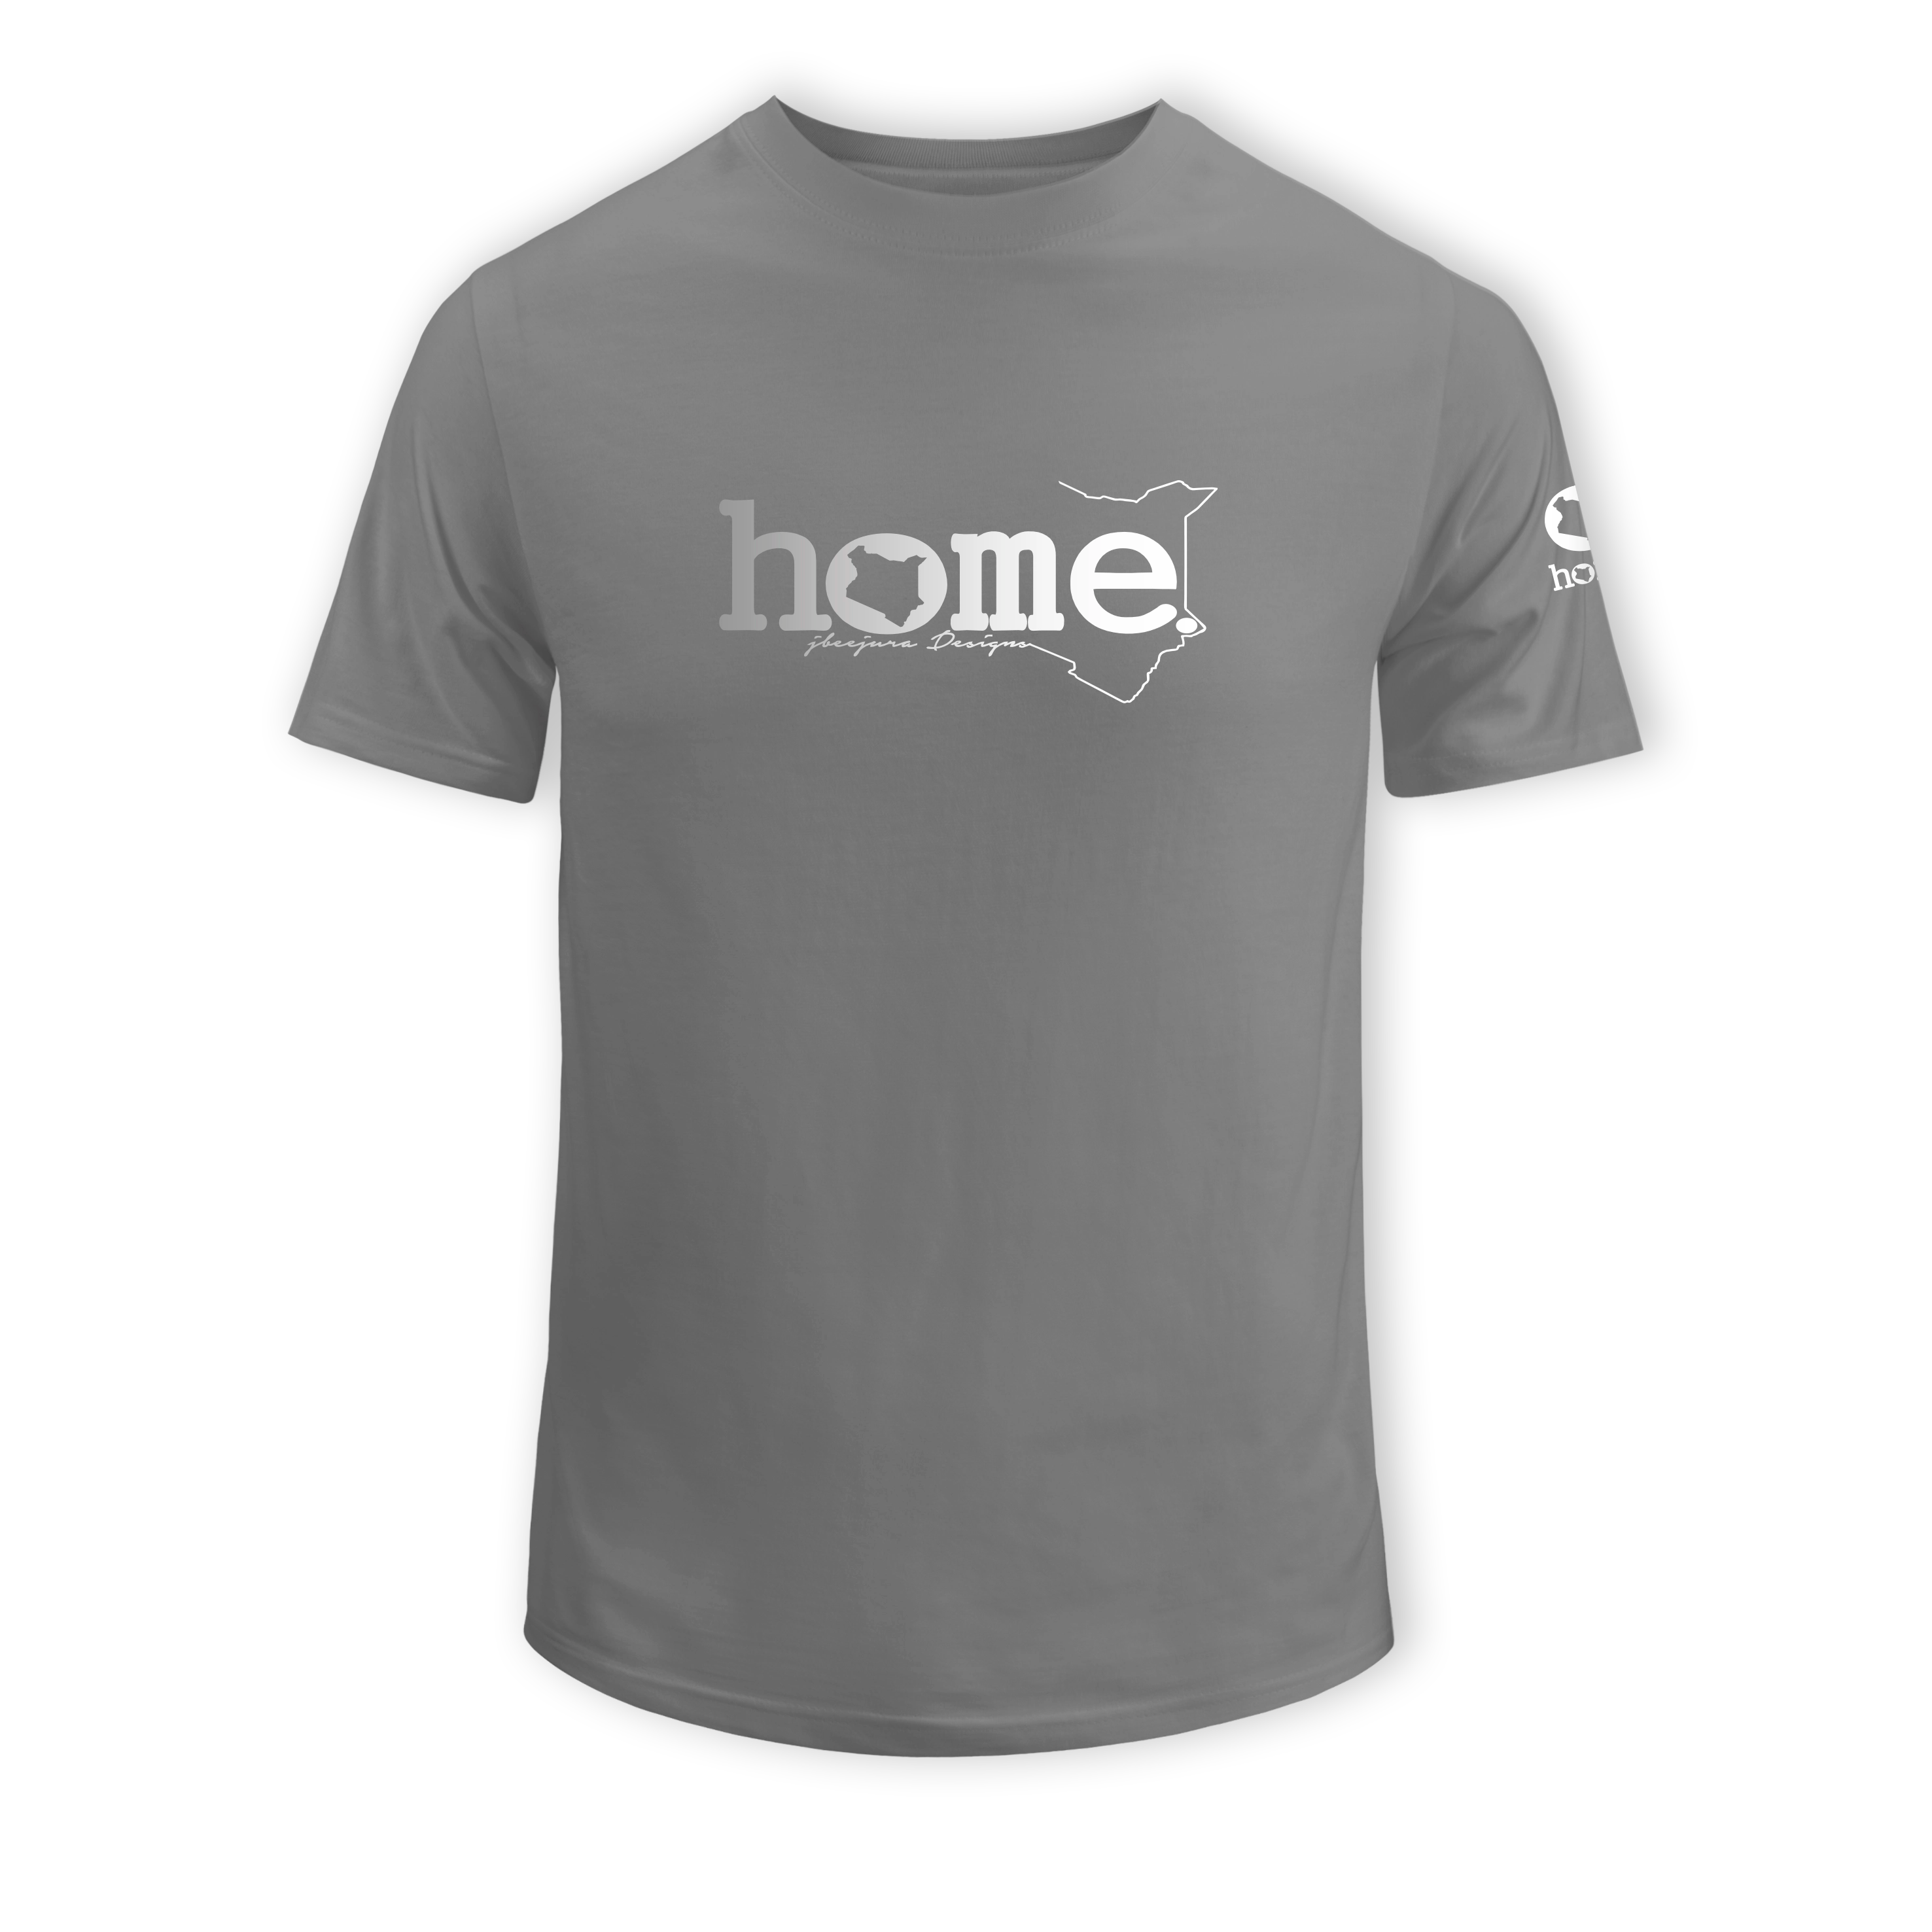 home_254 SHORT-SLEEVED SAGE T-SHIRT WITH A SILVER CLASSIC WORDS PRINT – COTTON PLUS FABRIC